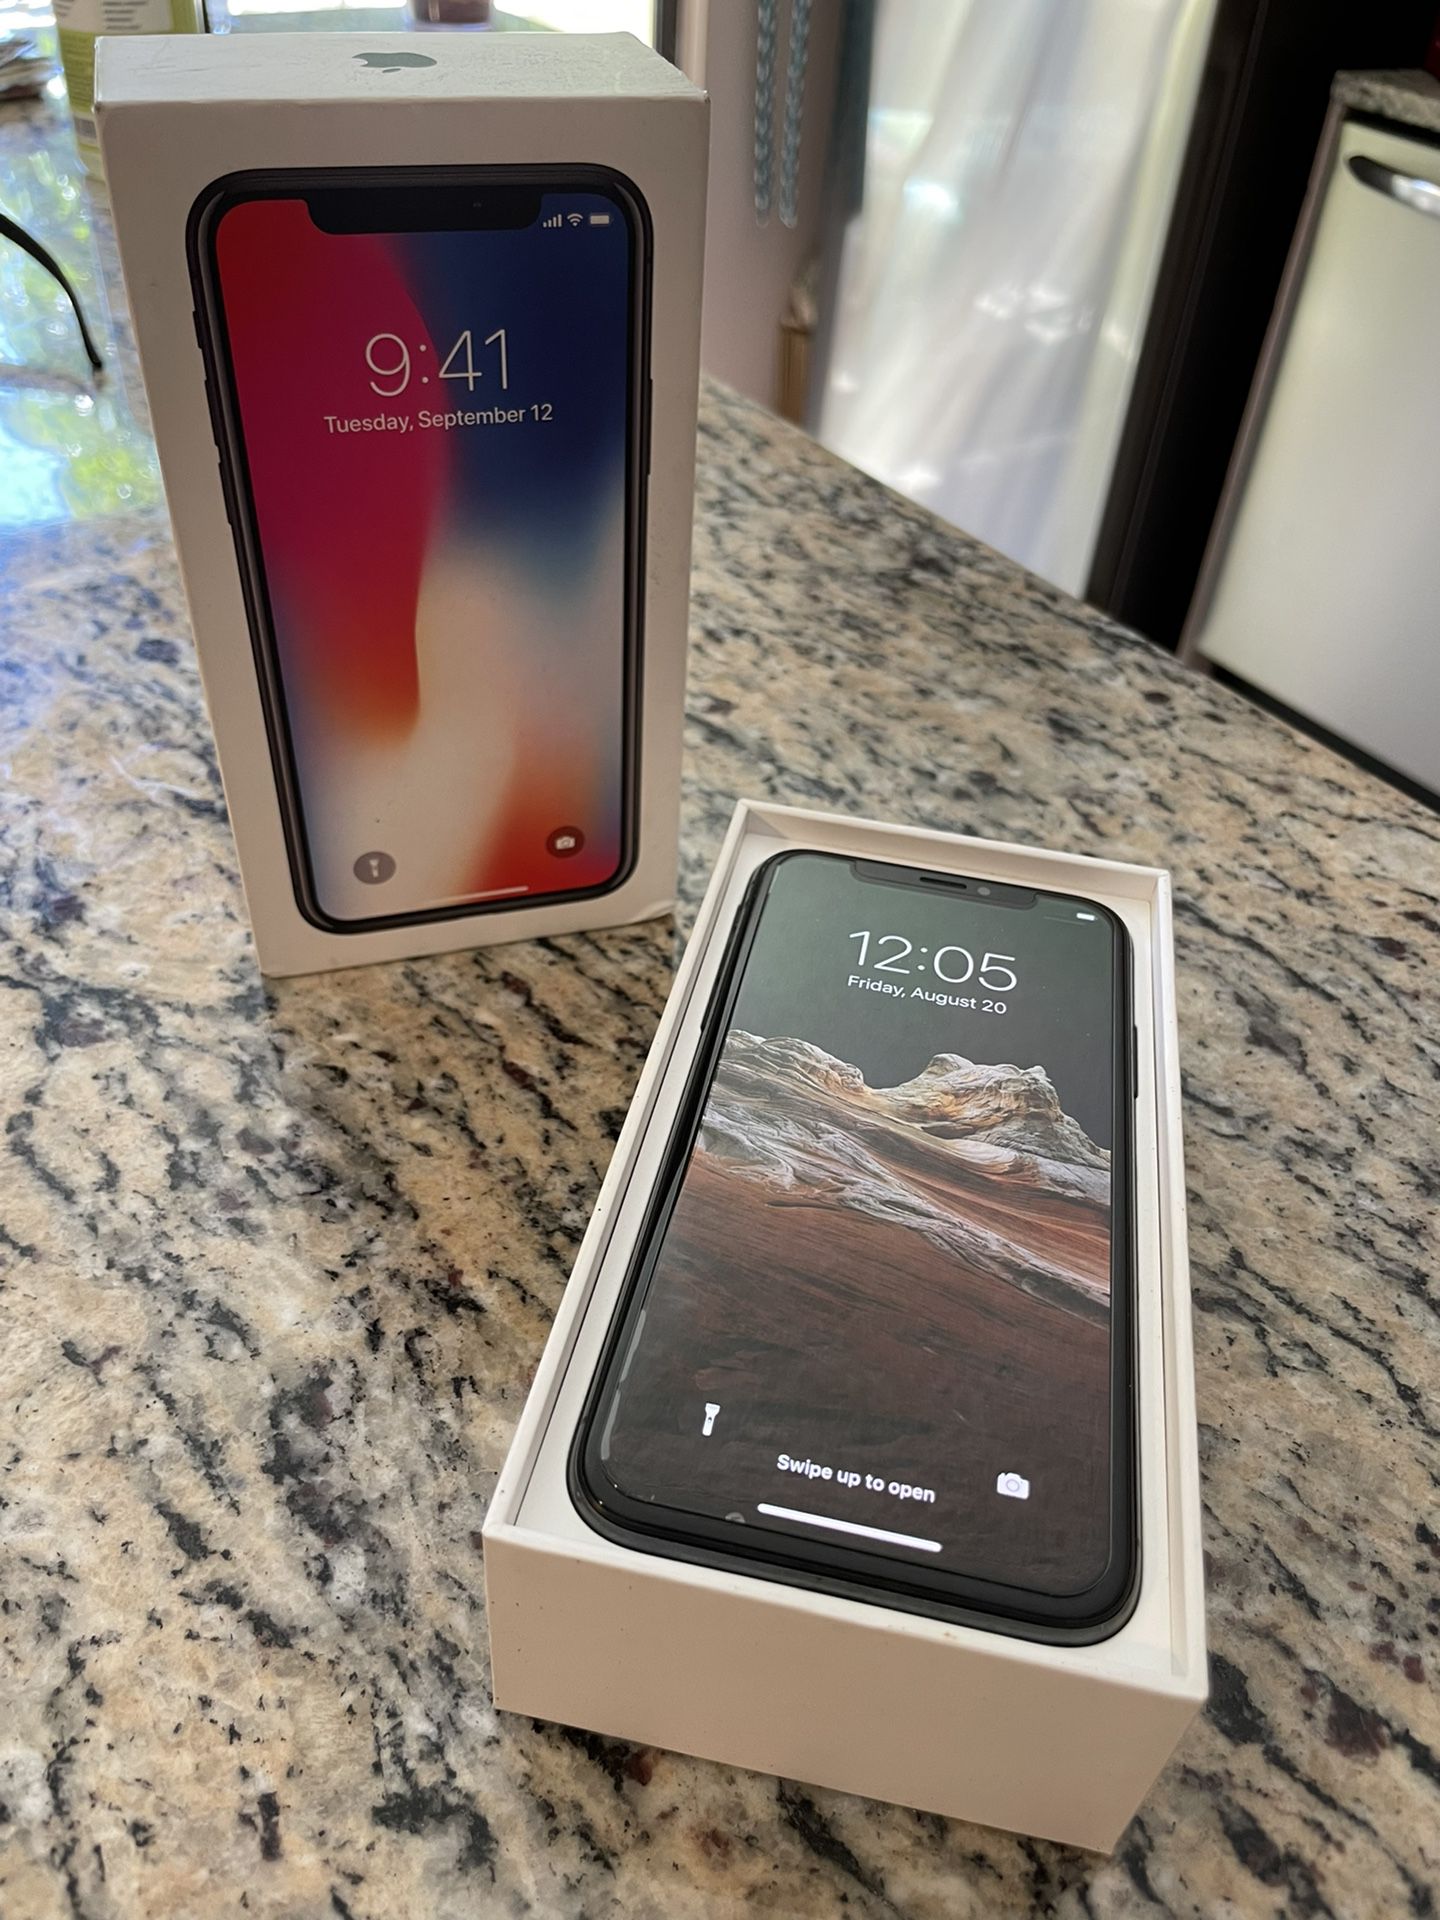 iPhone X UNLOCKED FOR ANY NETWORK W/Box And Charger 